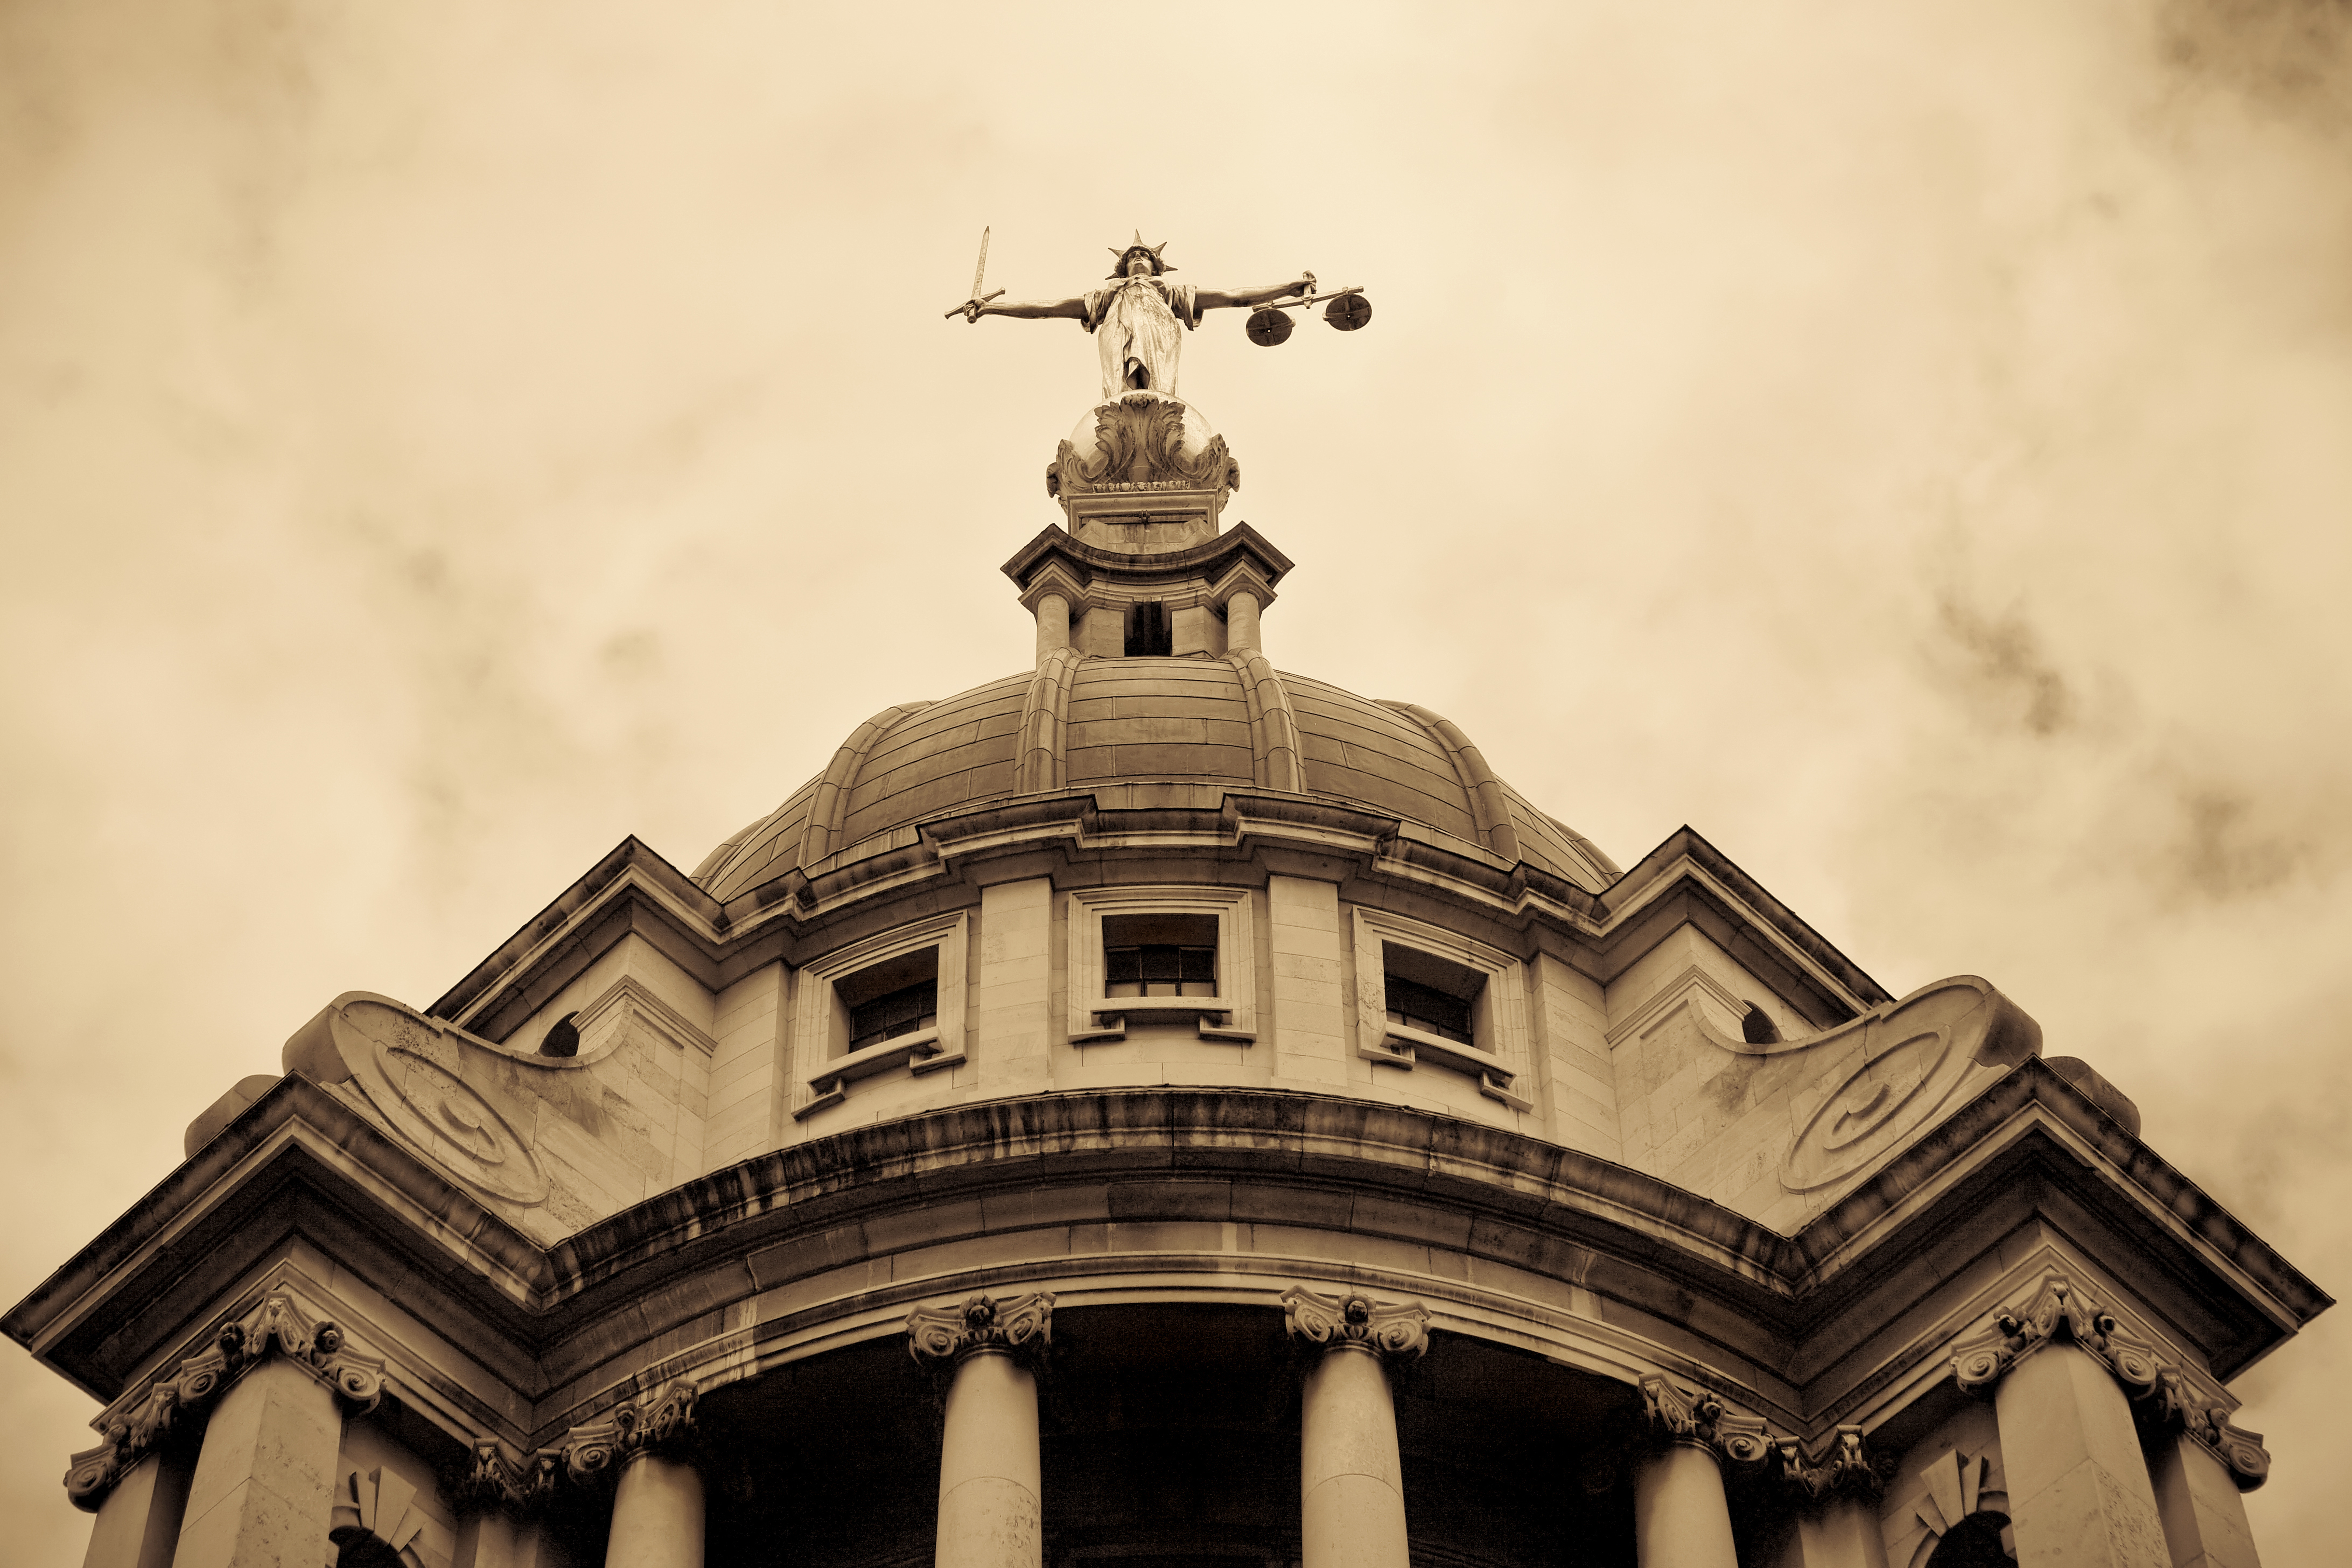 Criminal court the Old Bailey in the City of London